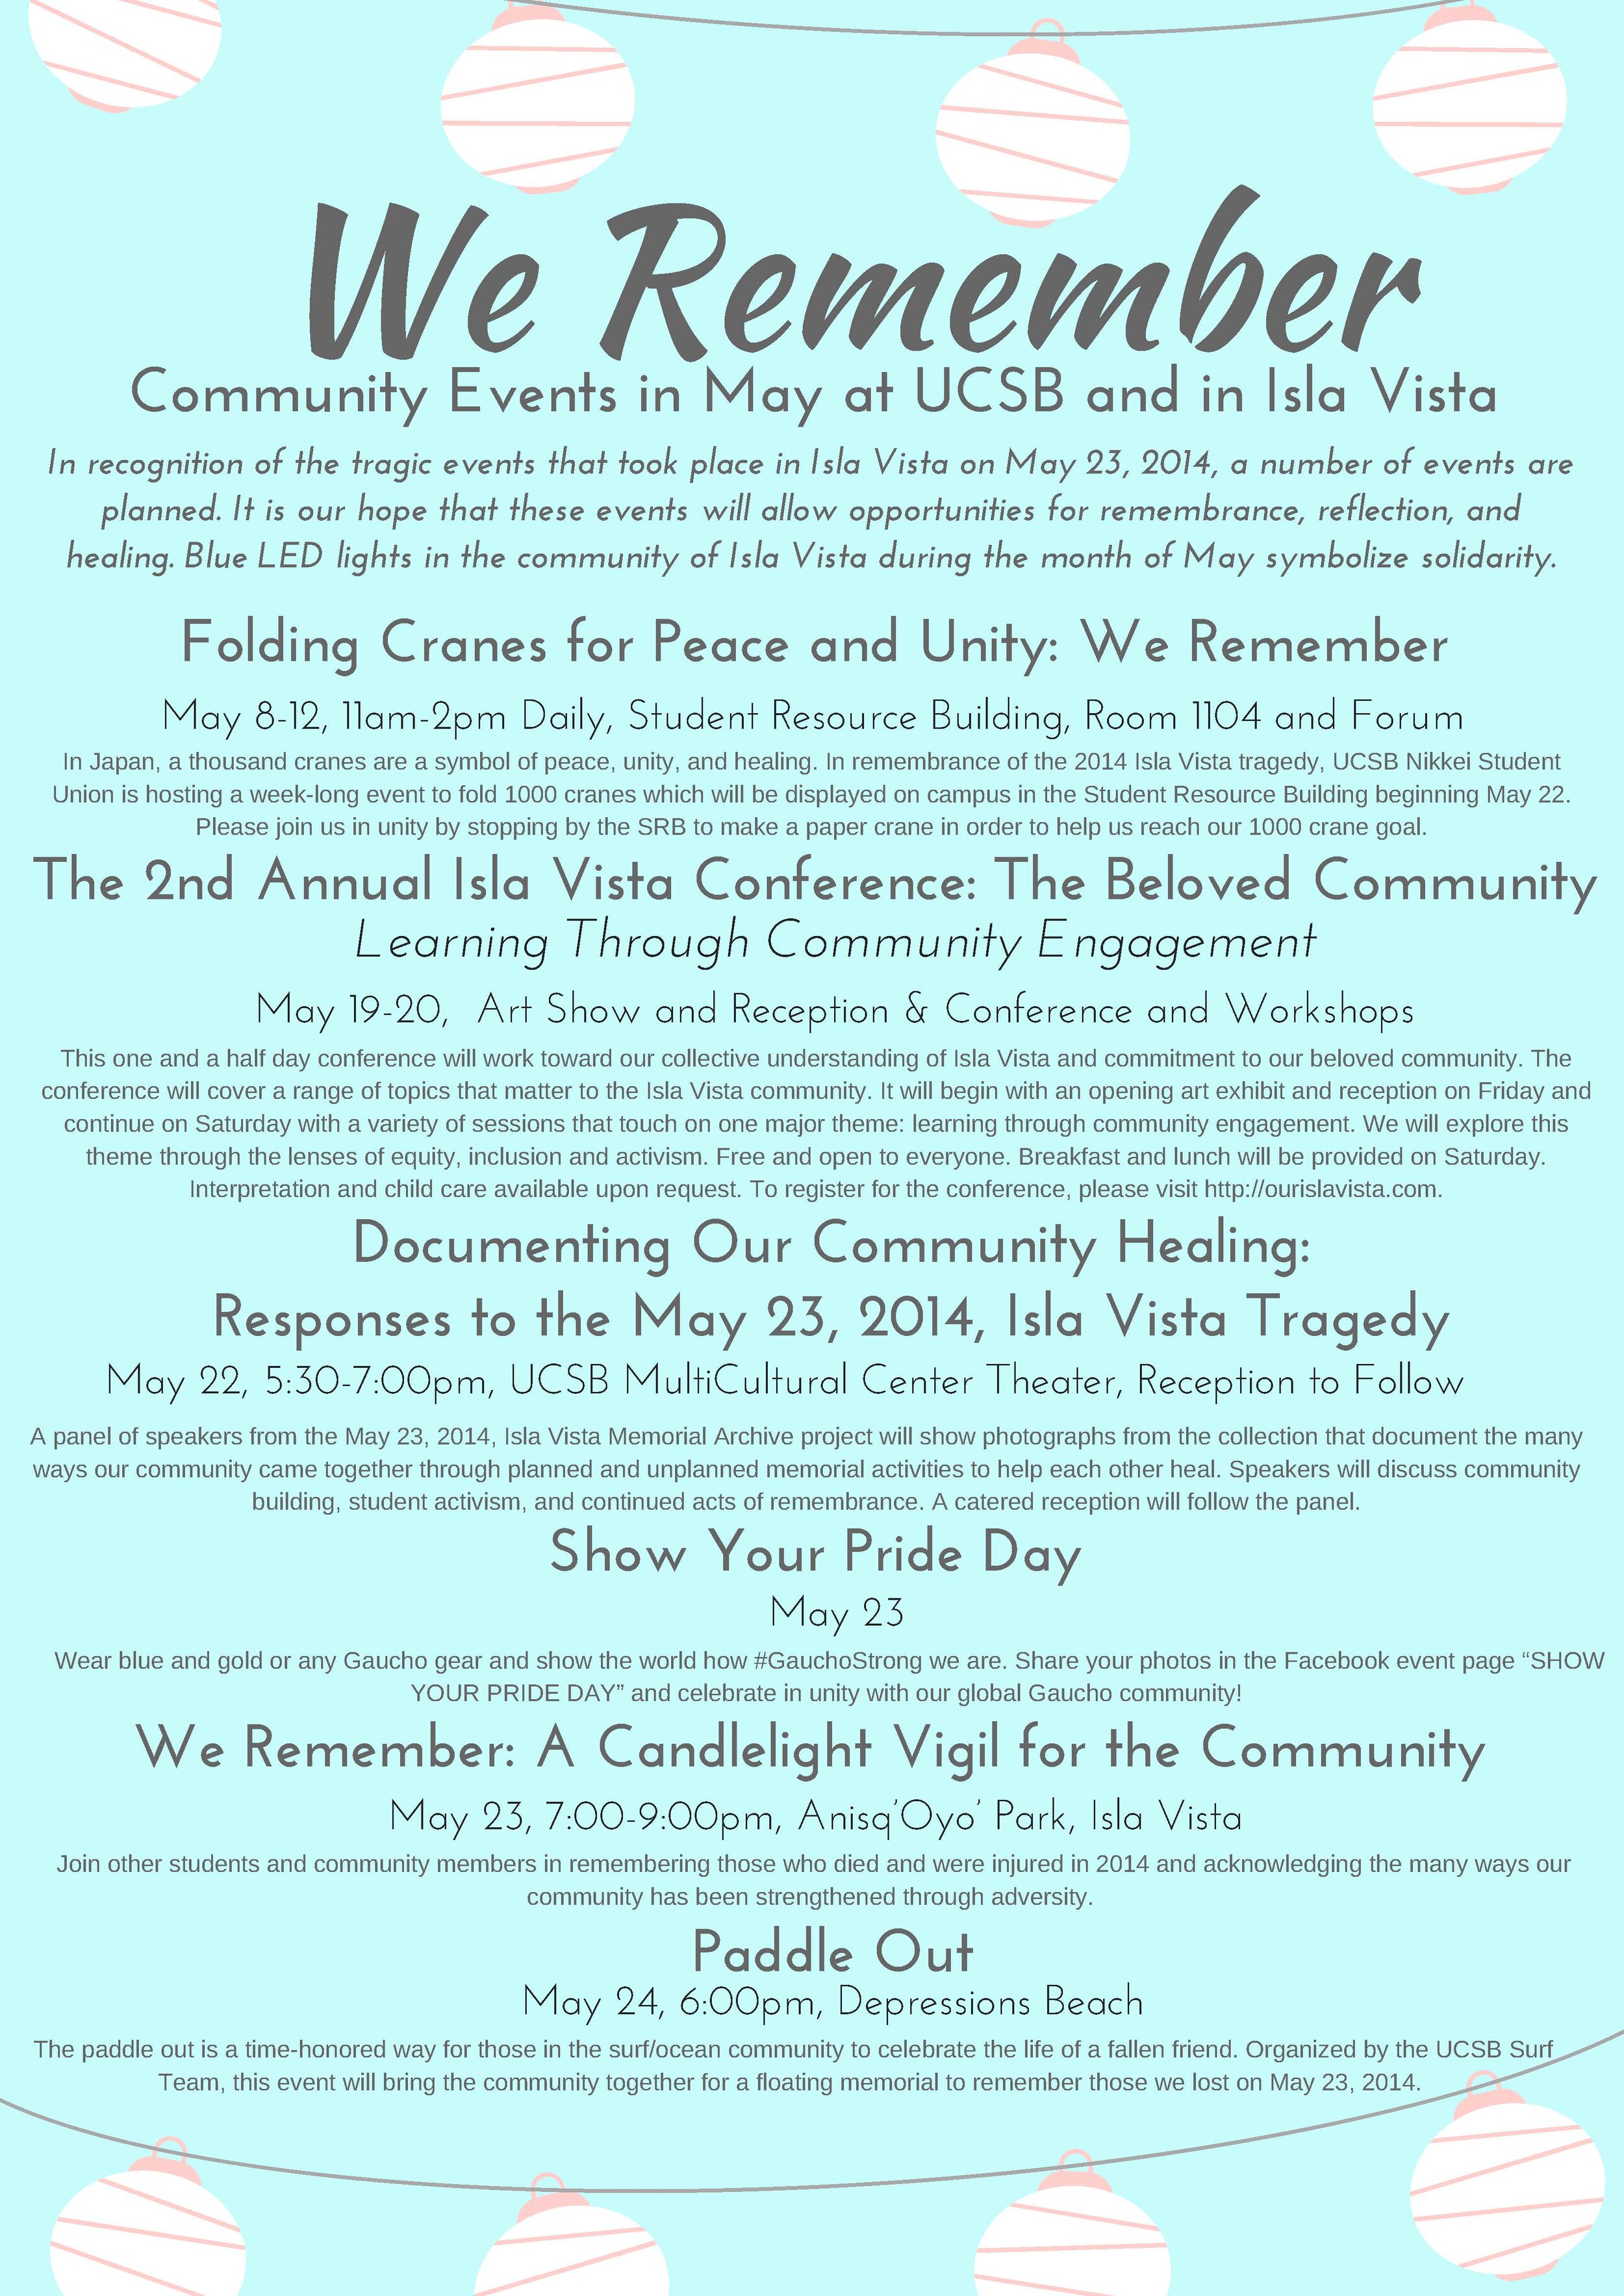 We Remember- Community Events in May at UCSB and in Isla Vista (Updated).jpg